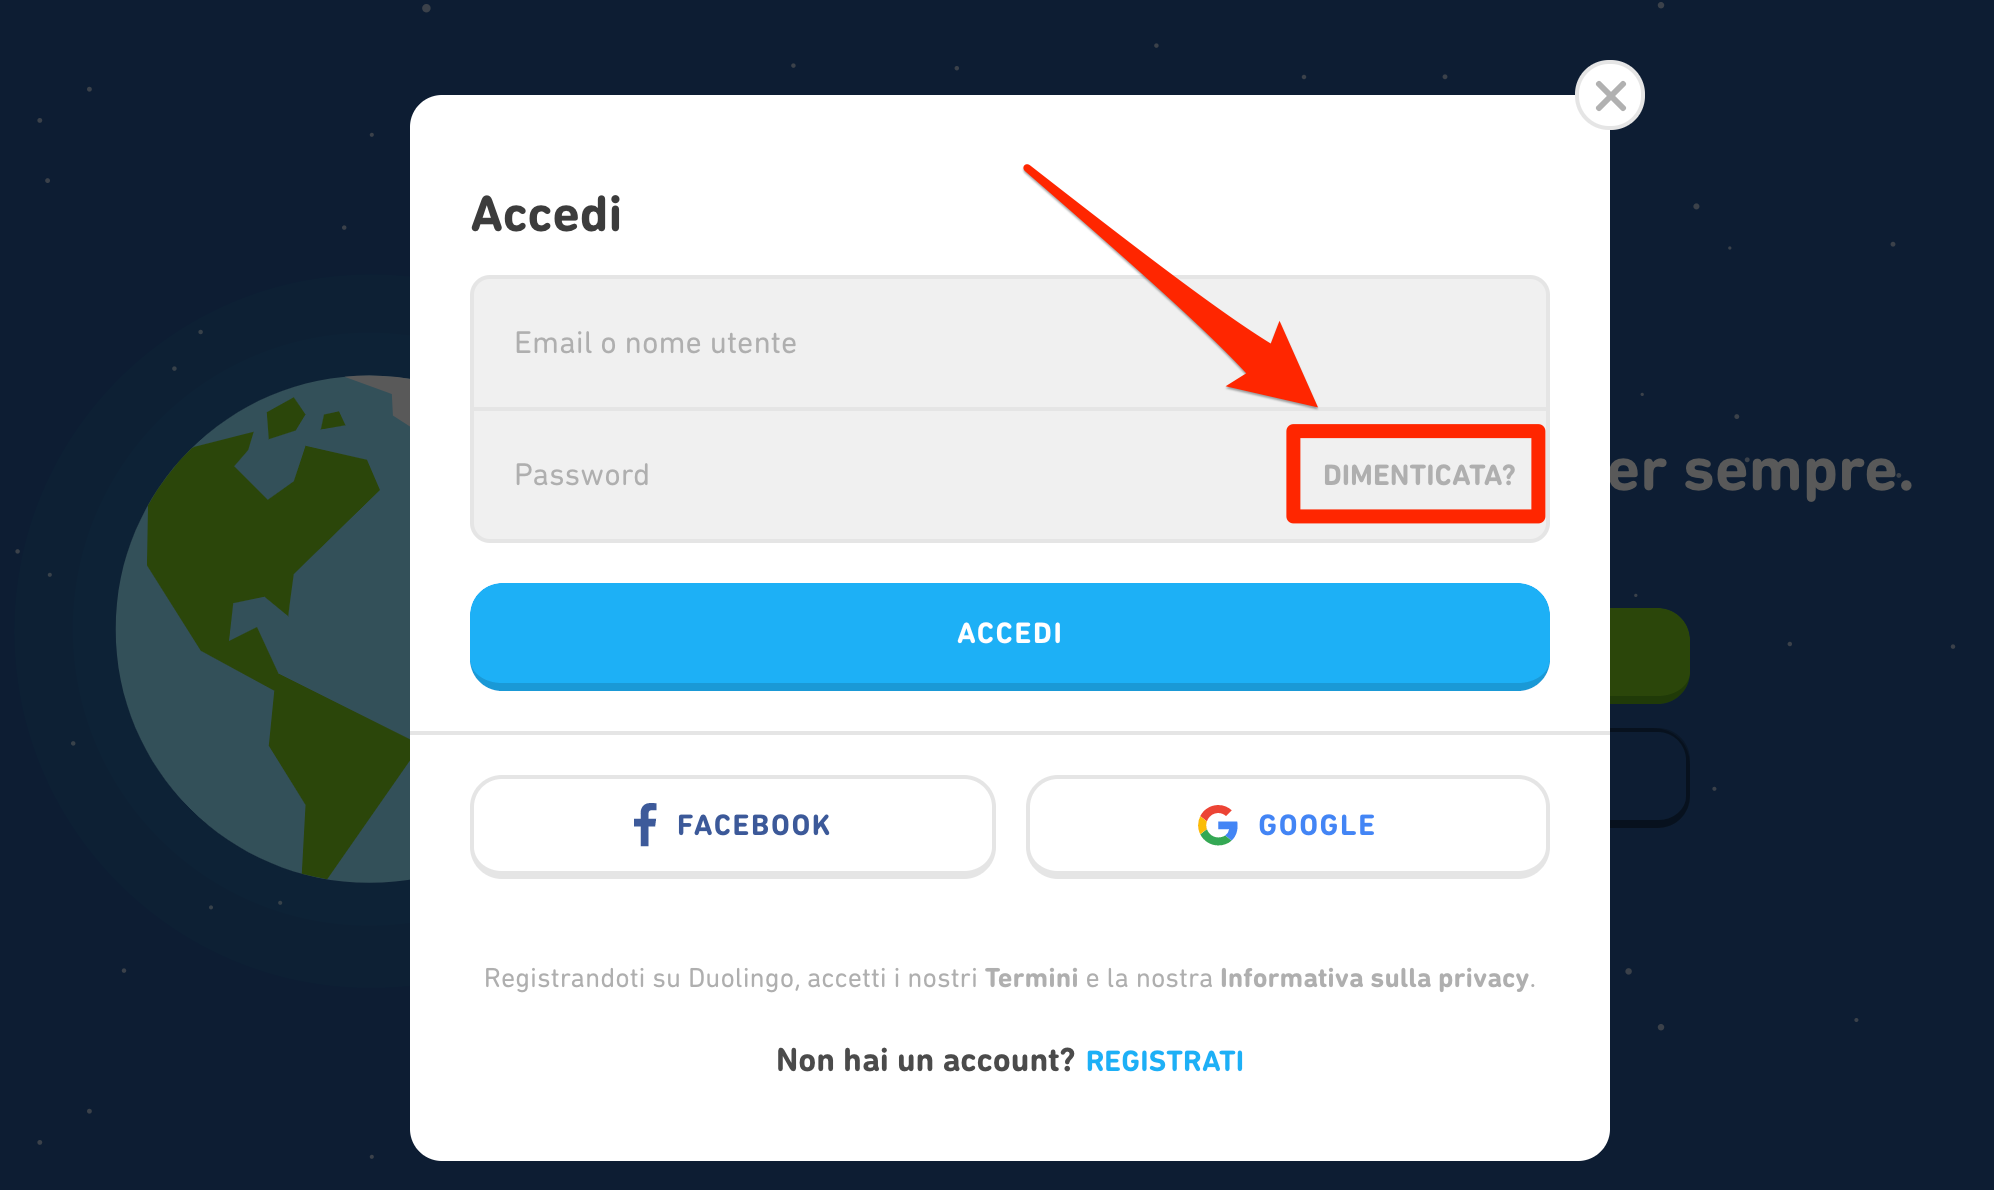 I_can_t_access_my_account_or_reset_my_password.png